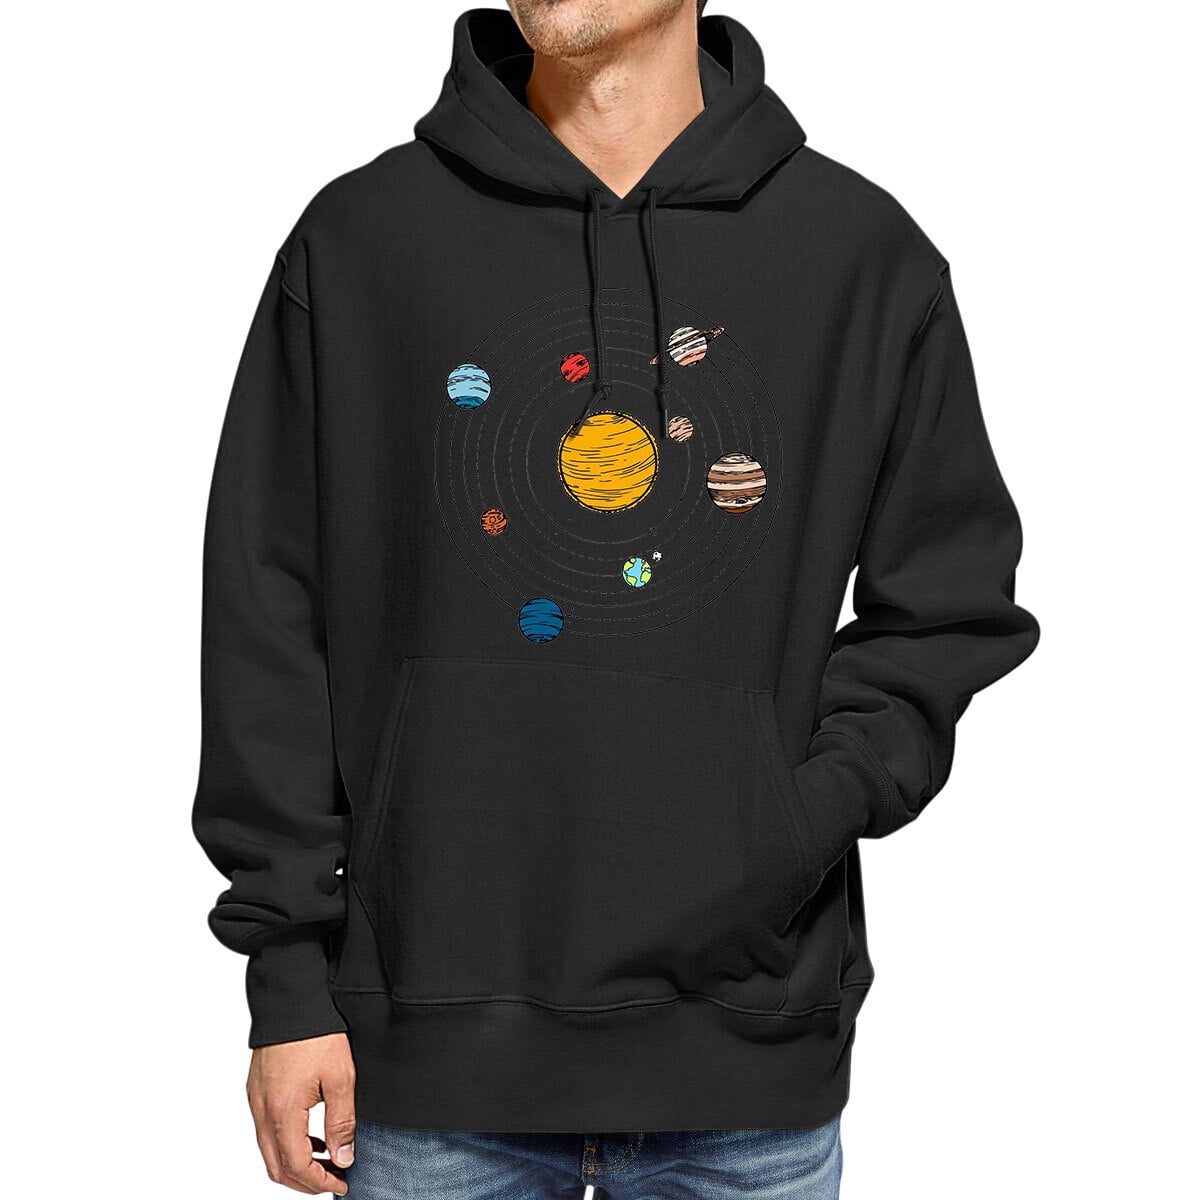 Give Me Some Space Funny Novelty Astronaut Humor Fashion Design Cotton Hoodie Sweatshirt